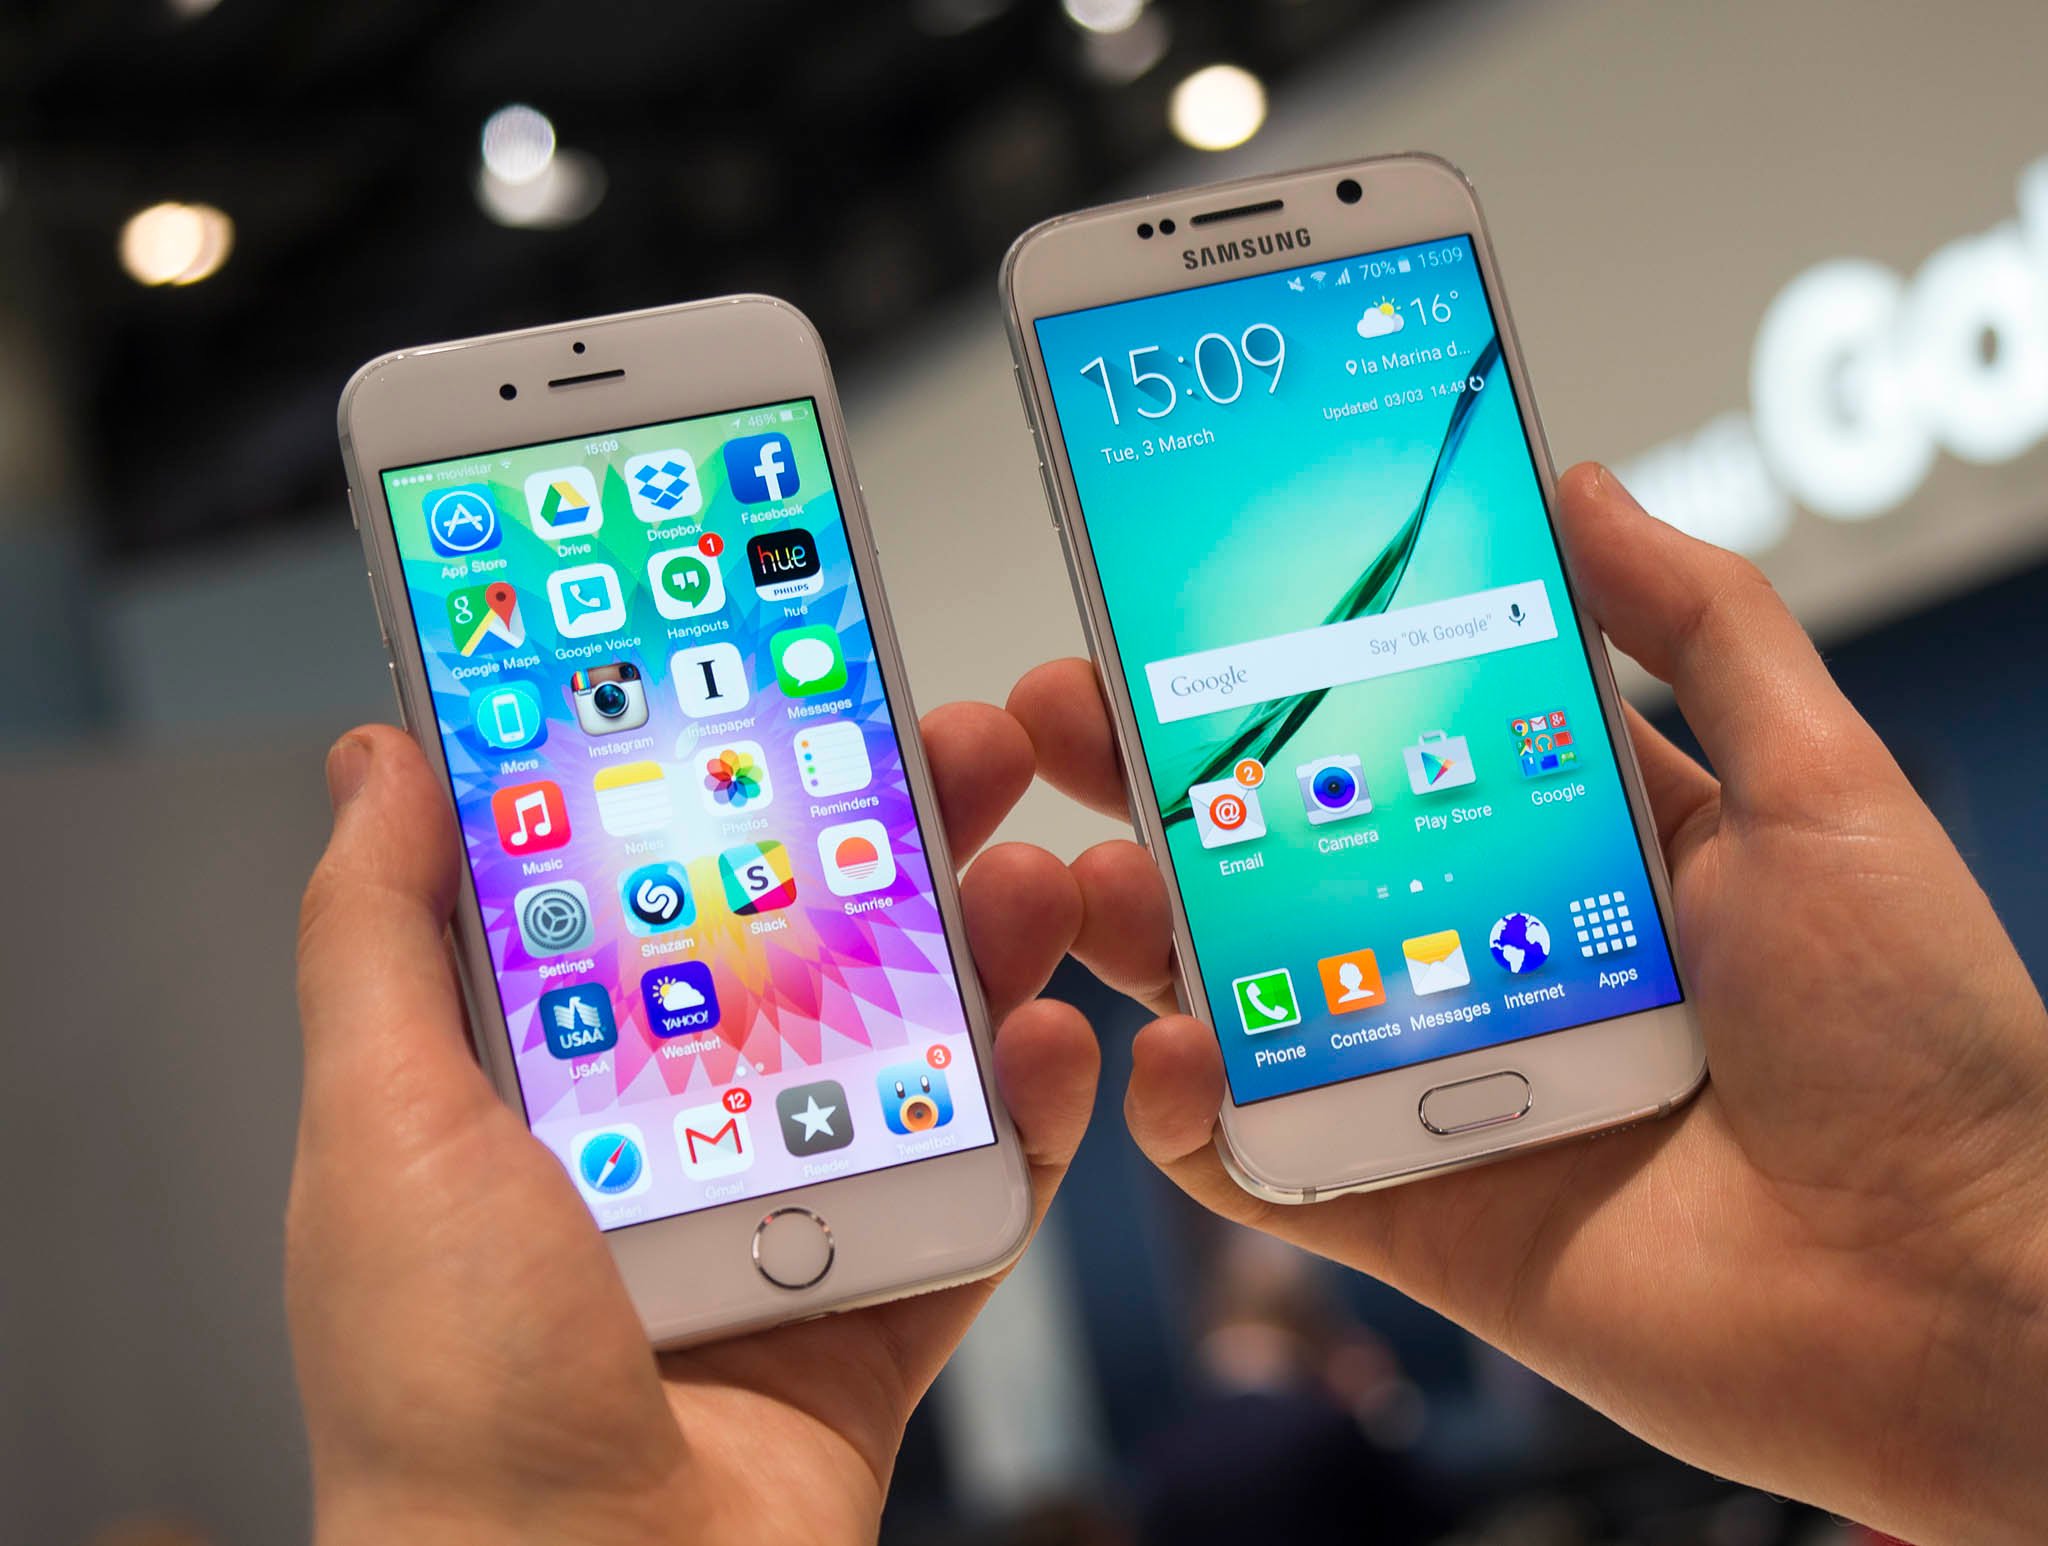 Why did your dump your Samsung Galaxy S for an iPhone 6?